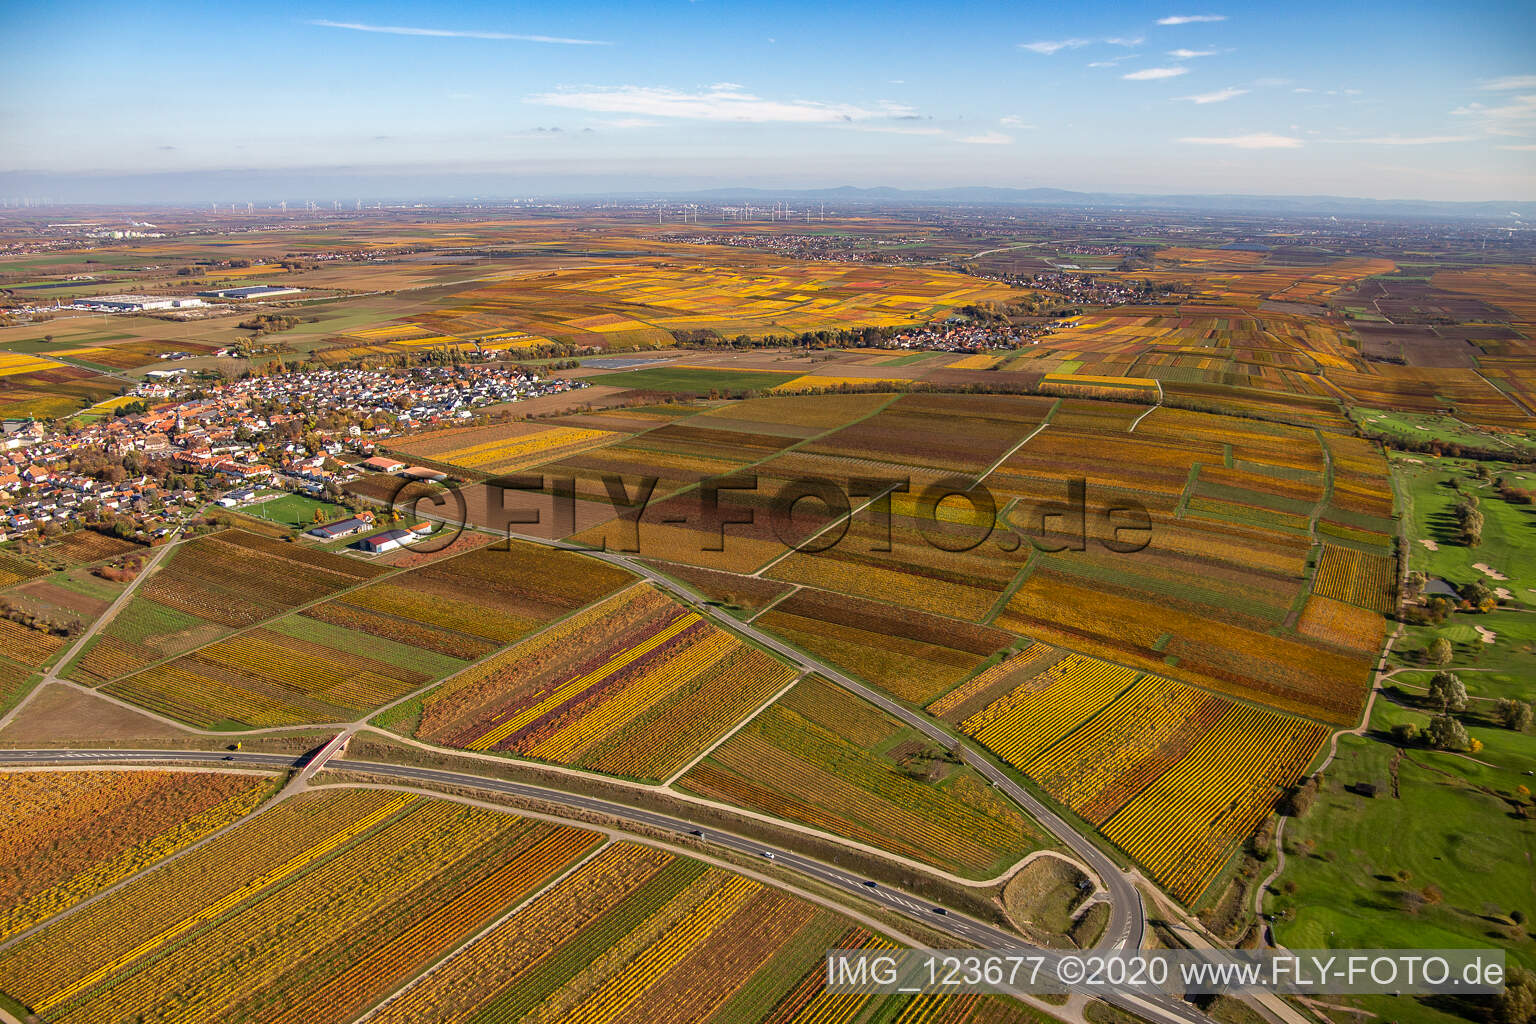 Kirchheim an der Weinstraße in the state Rhineland-Palatinate, Germany from the drone perspective